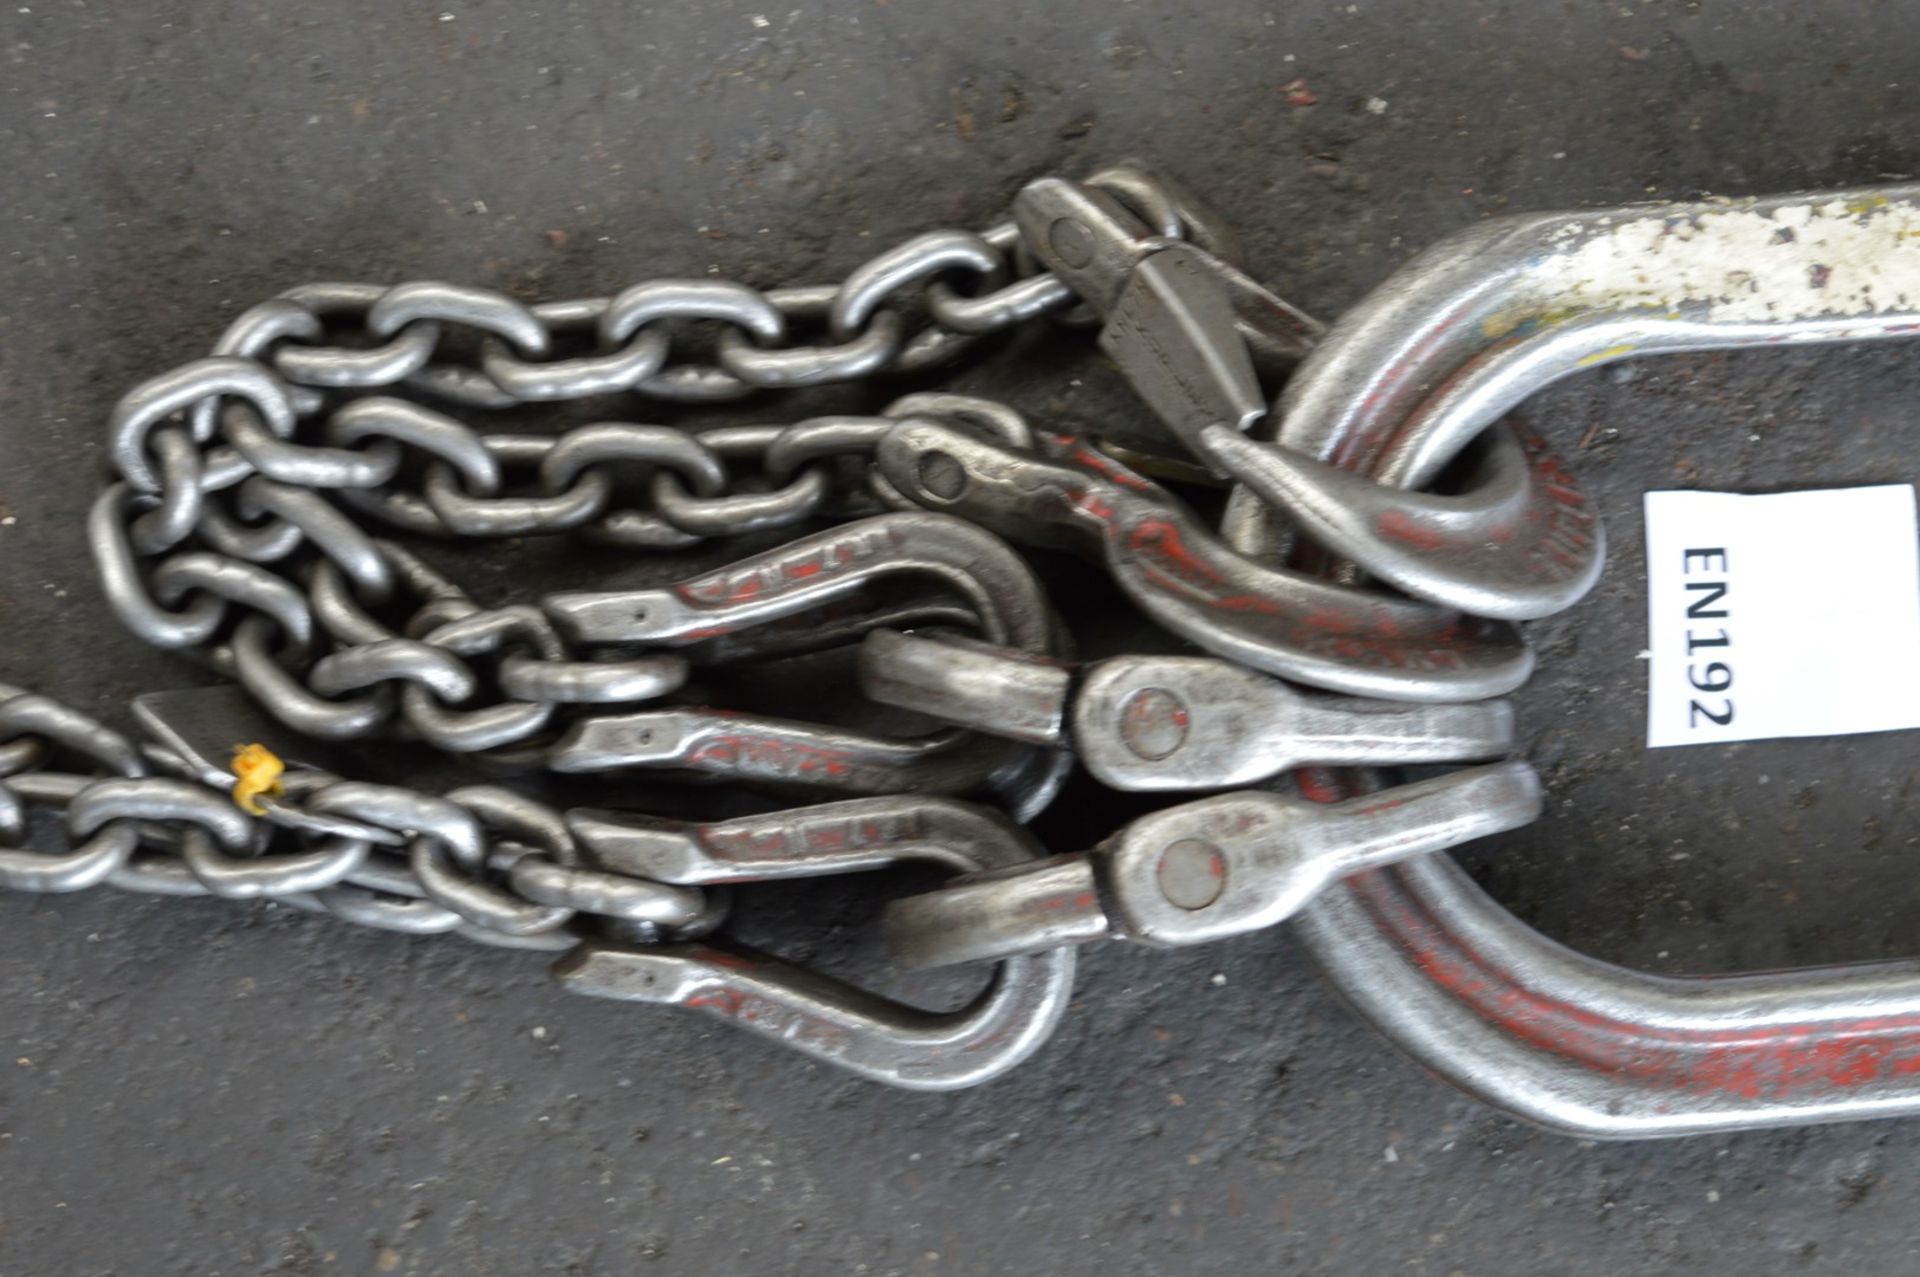 1 x Kuplex Lifting Chain With Various Sling Eye Hooks - Heavy Duty Lifting Equipment - CL202 - Ref - Image 6 of 7